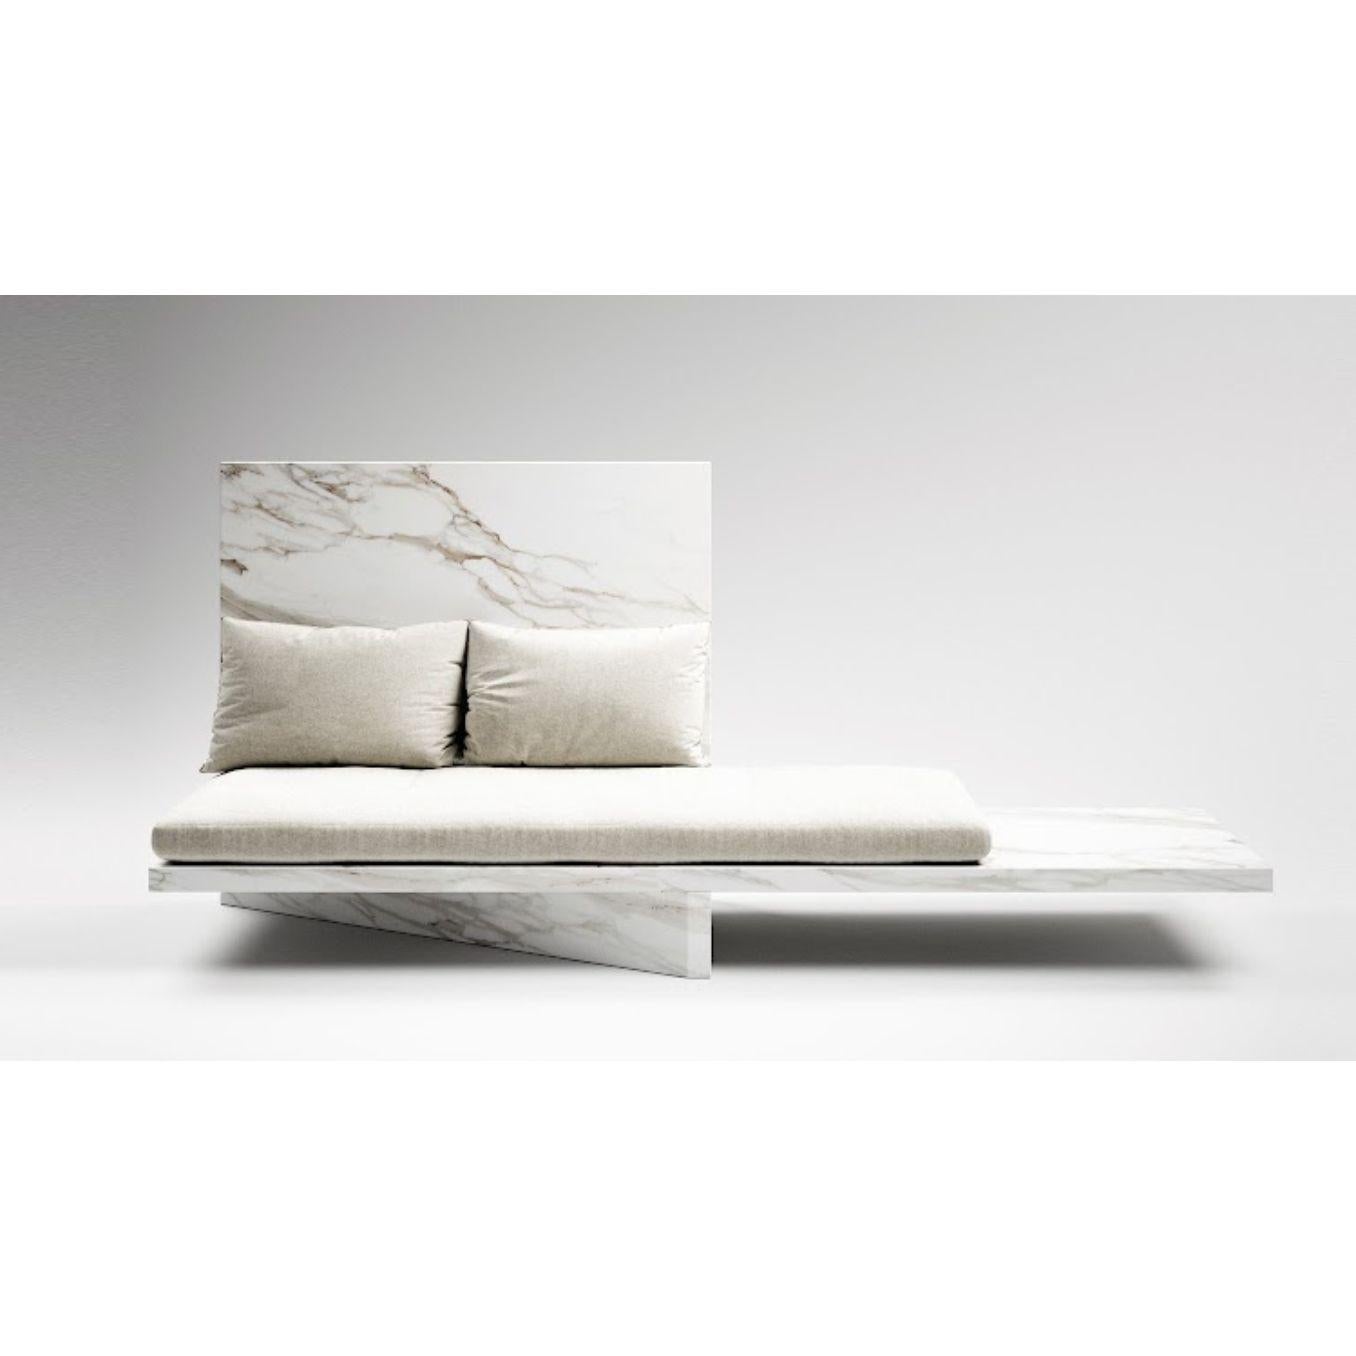 Some are born to sweet delight daybed by Claste
Dimensions: D 85 x W 228.6 x H 129.5 cm
Material: Marble, French Vanilla Fabric 
Weight: 818 kg
Also available in different and materials: Cararra Gioa (white)
A02 Rainbow Mist, Emperador Grey,